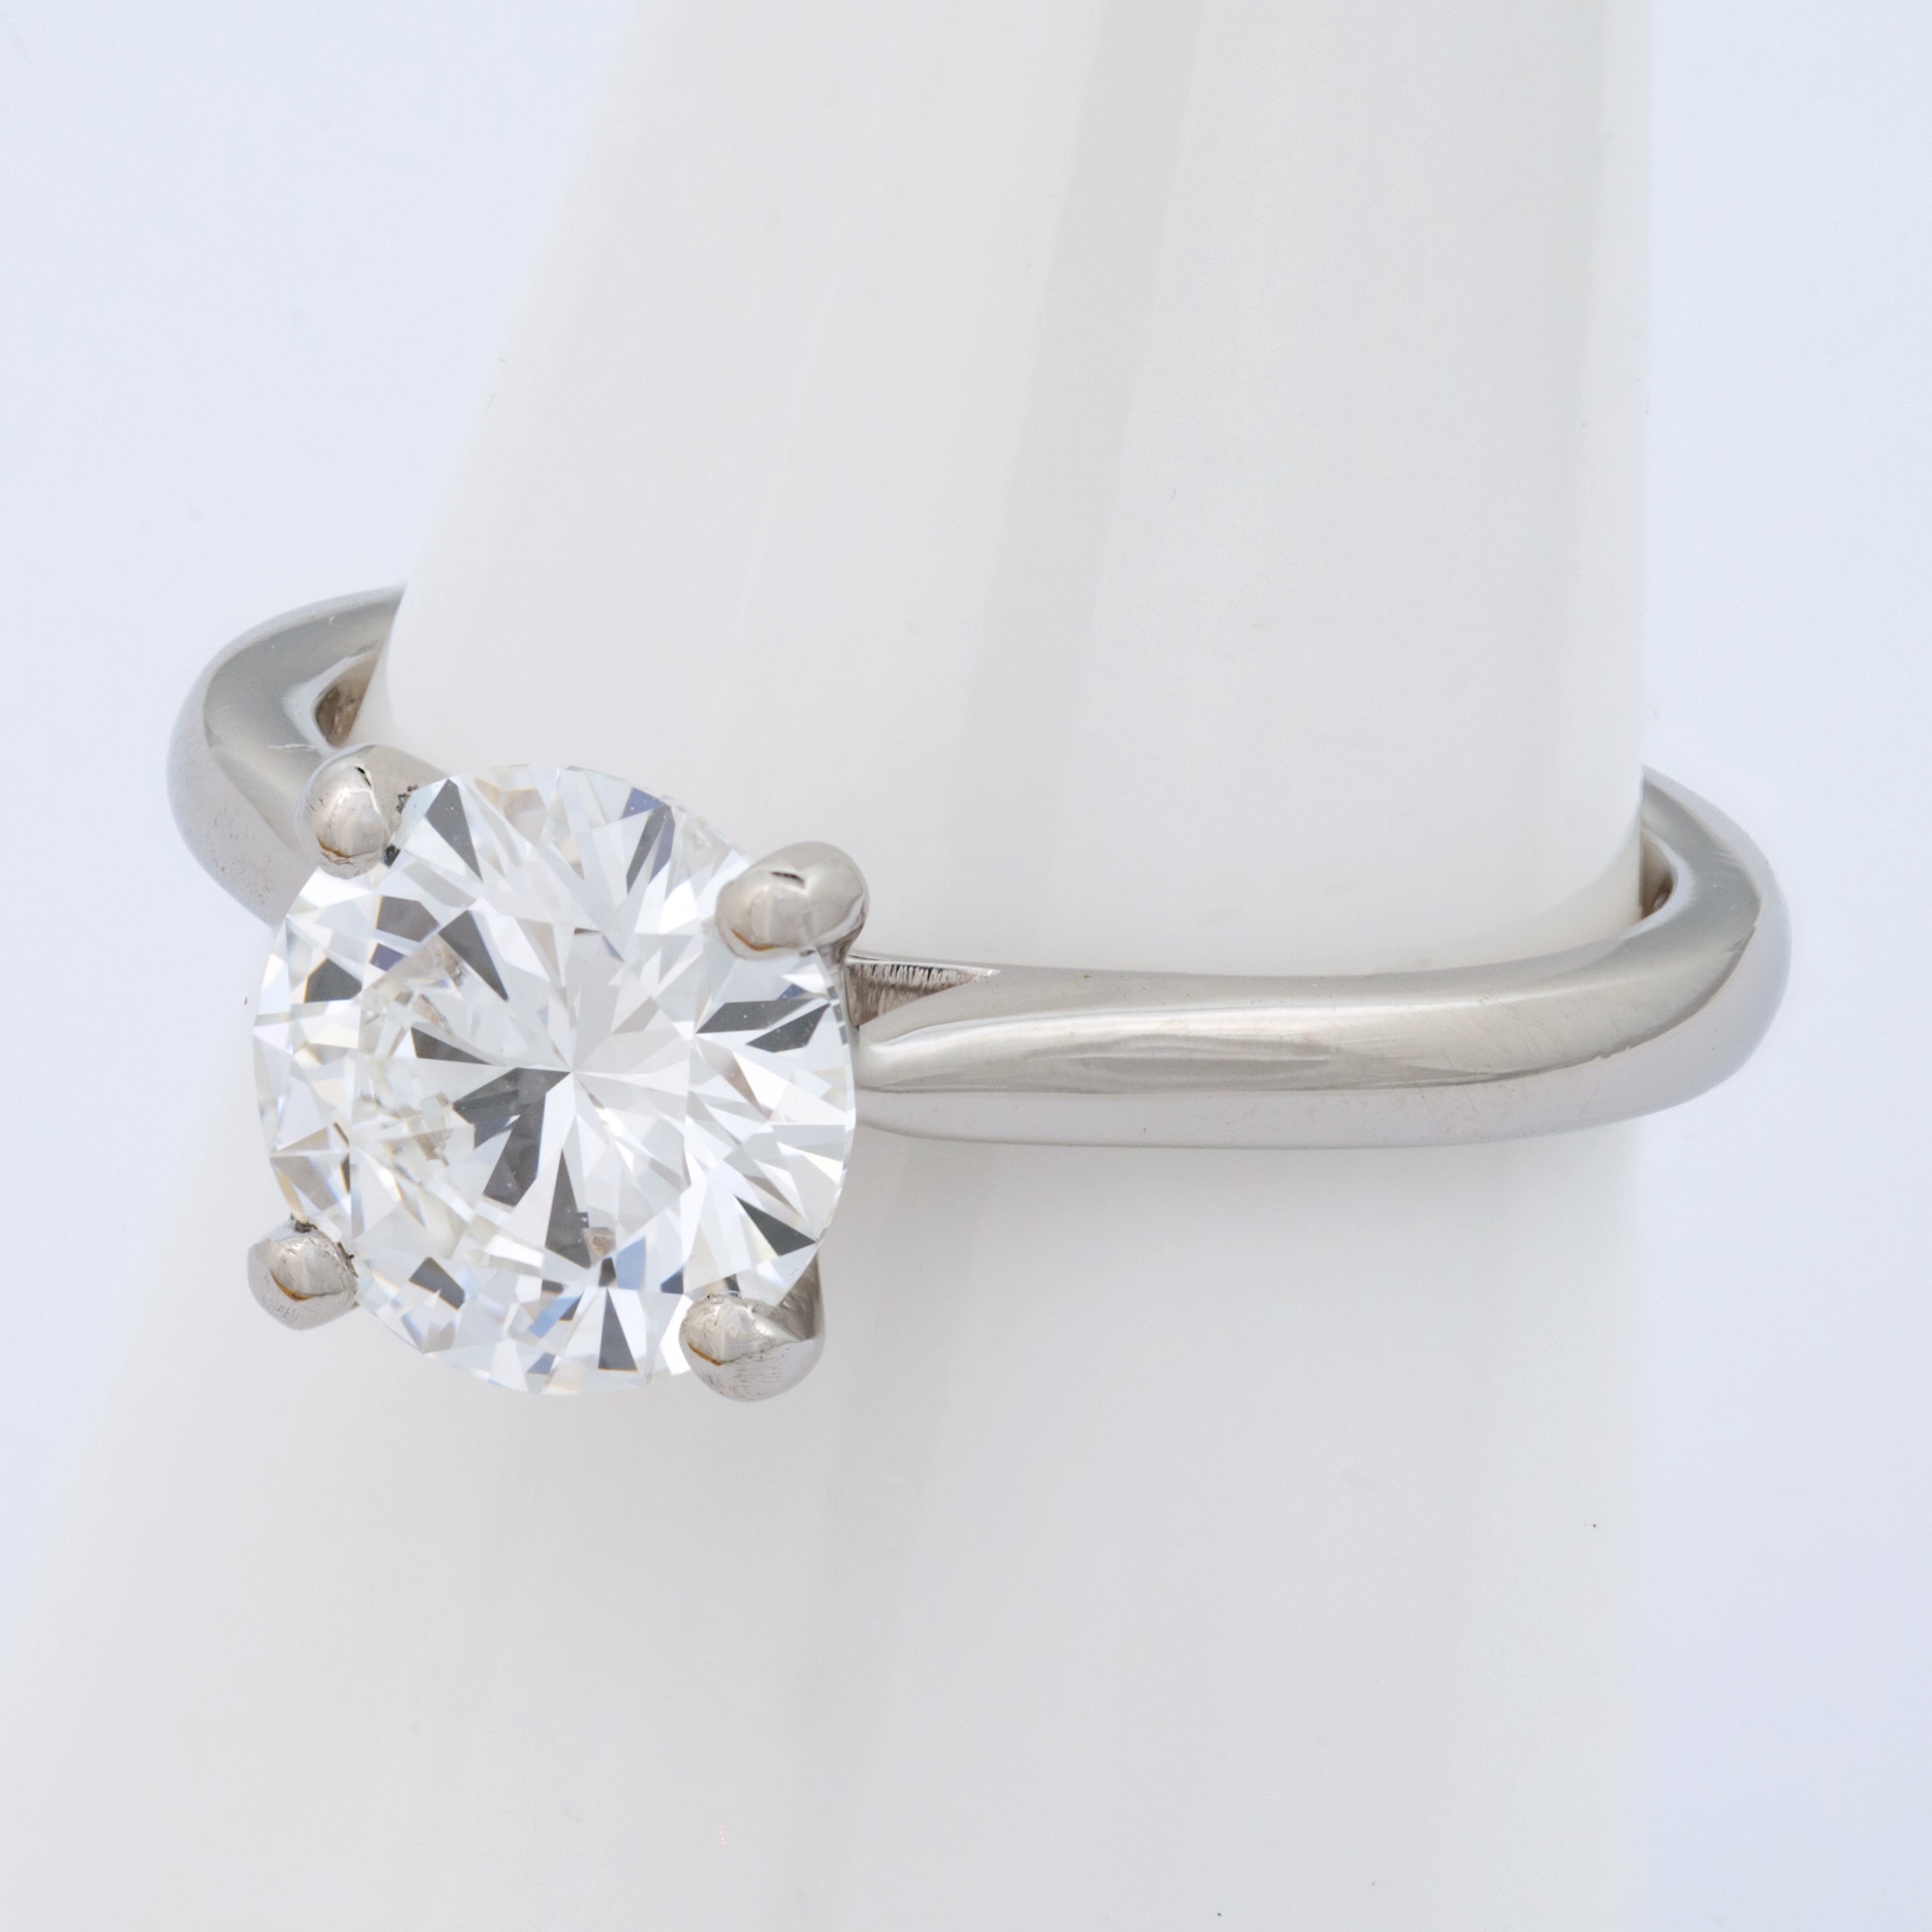 An exceptional quality platinum D-colour, 1.55ct, VVS2 clarity solitaire diamond ring, certificated - Image 6 of 9